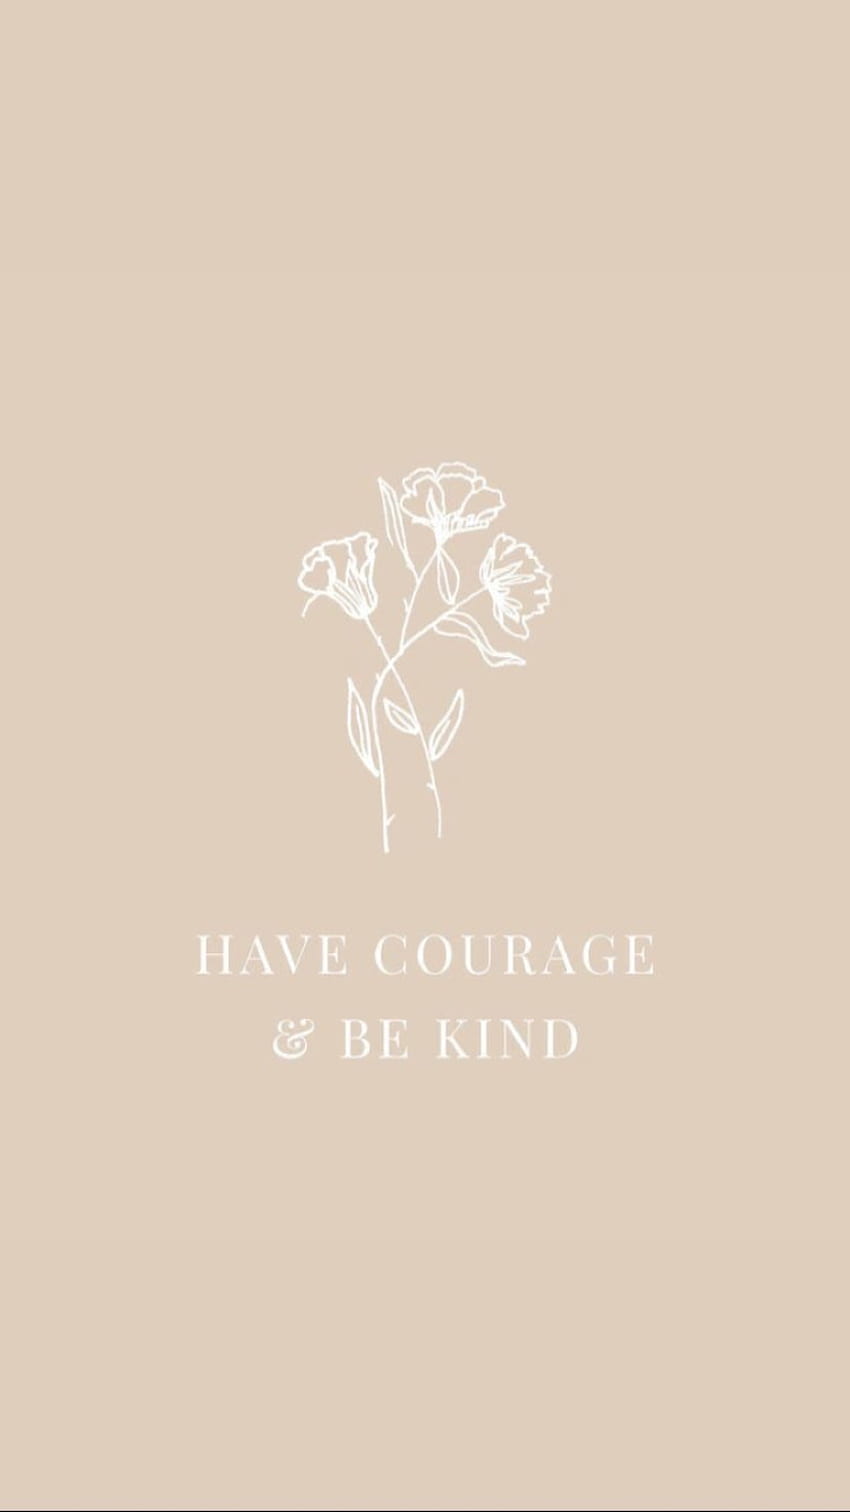 HF on BETTER ME. Have courage and be kind, Courage quotes, Funny iphone HD phone wallpaper